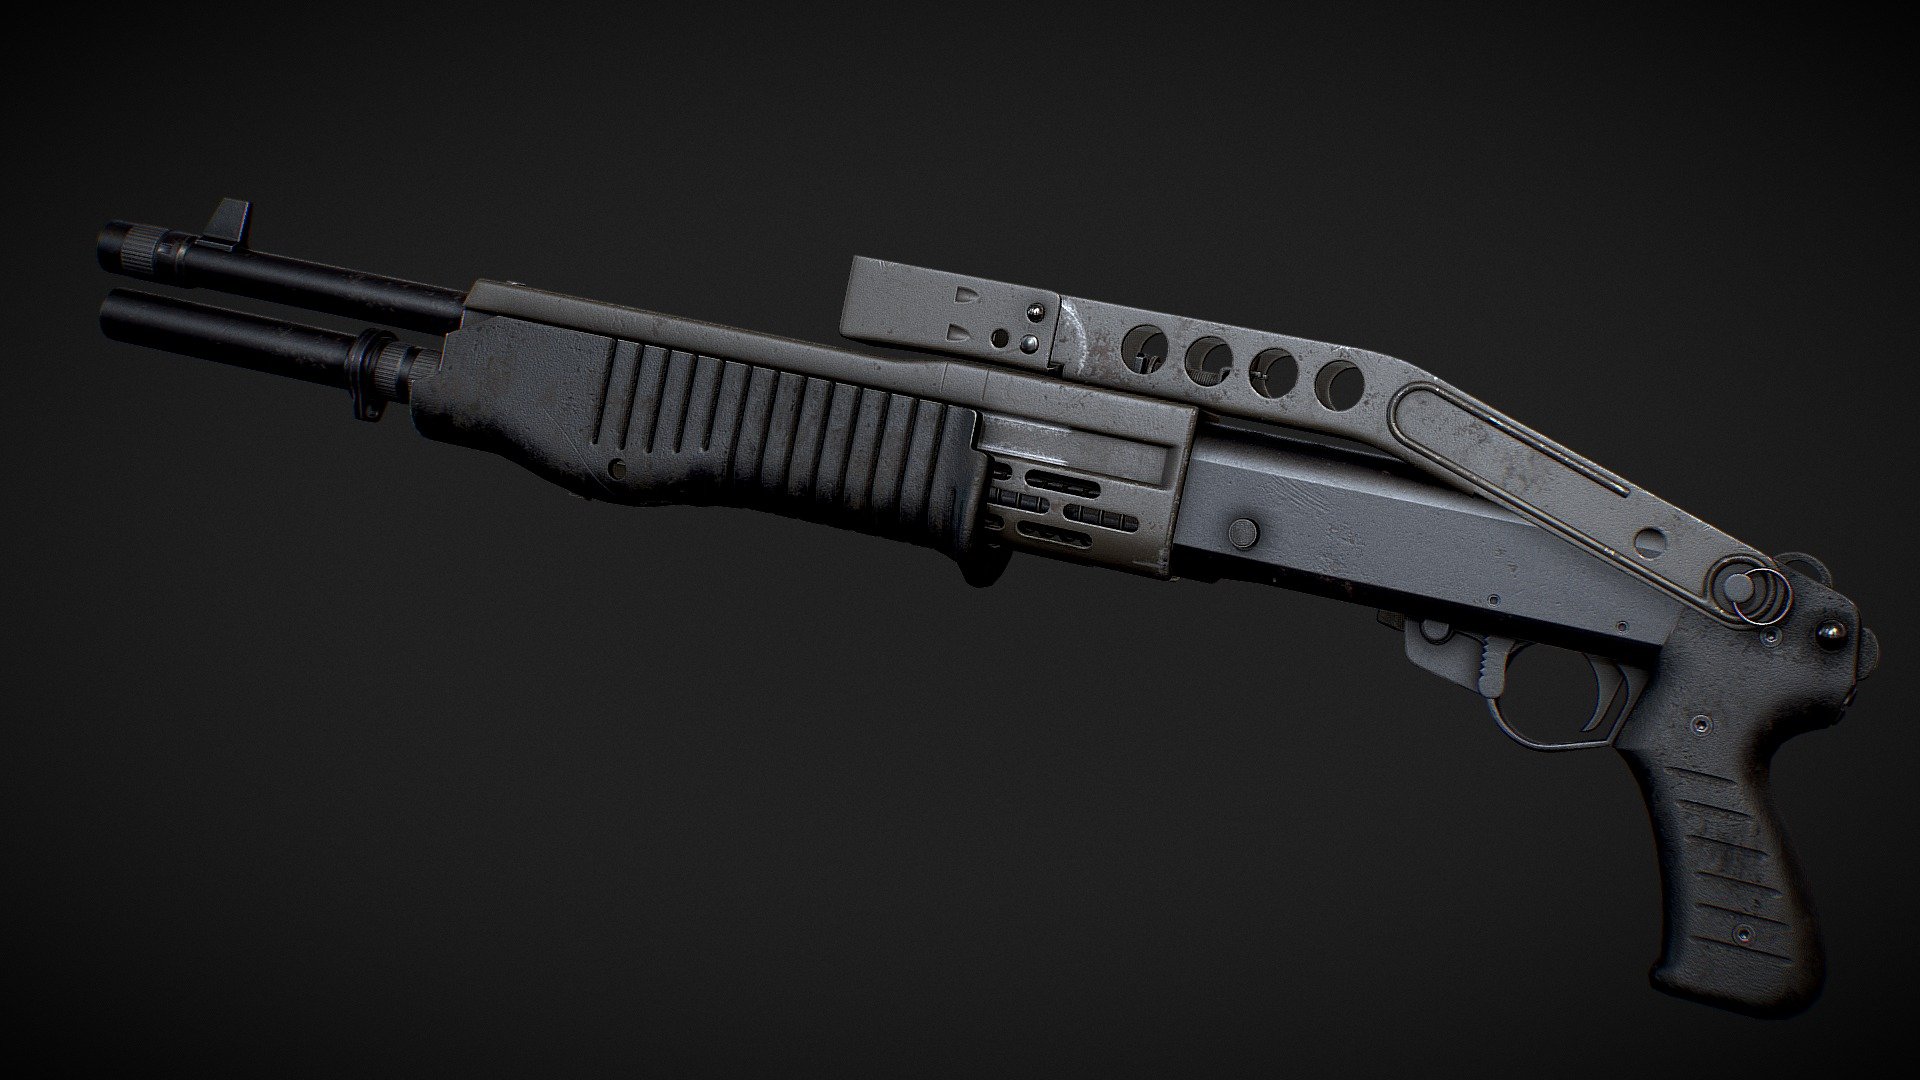 &mdash;General Information&mdash;

Lowpoly, optimized for modern game engines.

Made using real world scales

High quality 4k textures

Created to be used in a modern engine that supports physically based rendering (PBR) comes with textures optimized for Unreal Engine 4 and Unity 5.

-Detailed Model Specifications-

Weapon and Magazine contains 20 separate objects and are ready to be rigged. the objects are:

Receiver
Barrel
Bullet
TriggerPlateAsembly
PlasticGrip
MagazineExtension
BreechBlockSlide
CartridgeCarrier
HandSafetyPin
BreechBoltLatchPin
CarrierLatchButton
MagazineCutOffButton
StockFrame
HandGuard
SlideActionSleeve
BreechBlock
ActionSpring
RetainingScrewWasher
GripRetainingScew
Trigger
Geometry :

Polygon : 34836

Vertices : 18027

Triangle : 35244

-Texture Information-

All 4k Texture (All textures are in .tga format)

Unreal:

&ndash; Base color

&ndash; OcclusionGroughnessMetallic

&ndash; Normal

Unity:

-Albedo

-Normal

-MetallicSmoothnessOcclusion

-AO

https://www.artstation.com/gameweapons - Franchi Spas 12 - Buy Royalty Free 3D model by GameWeapons 3d model